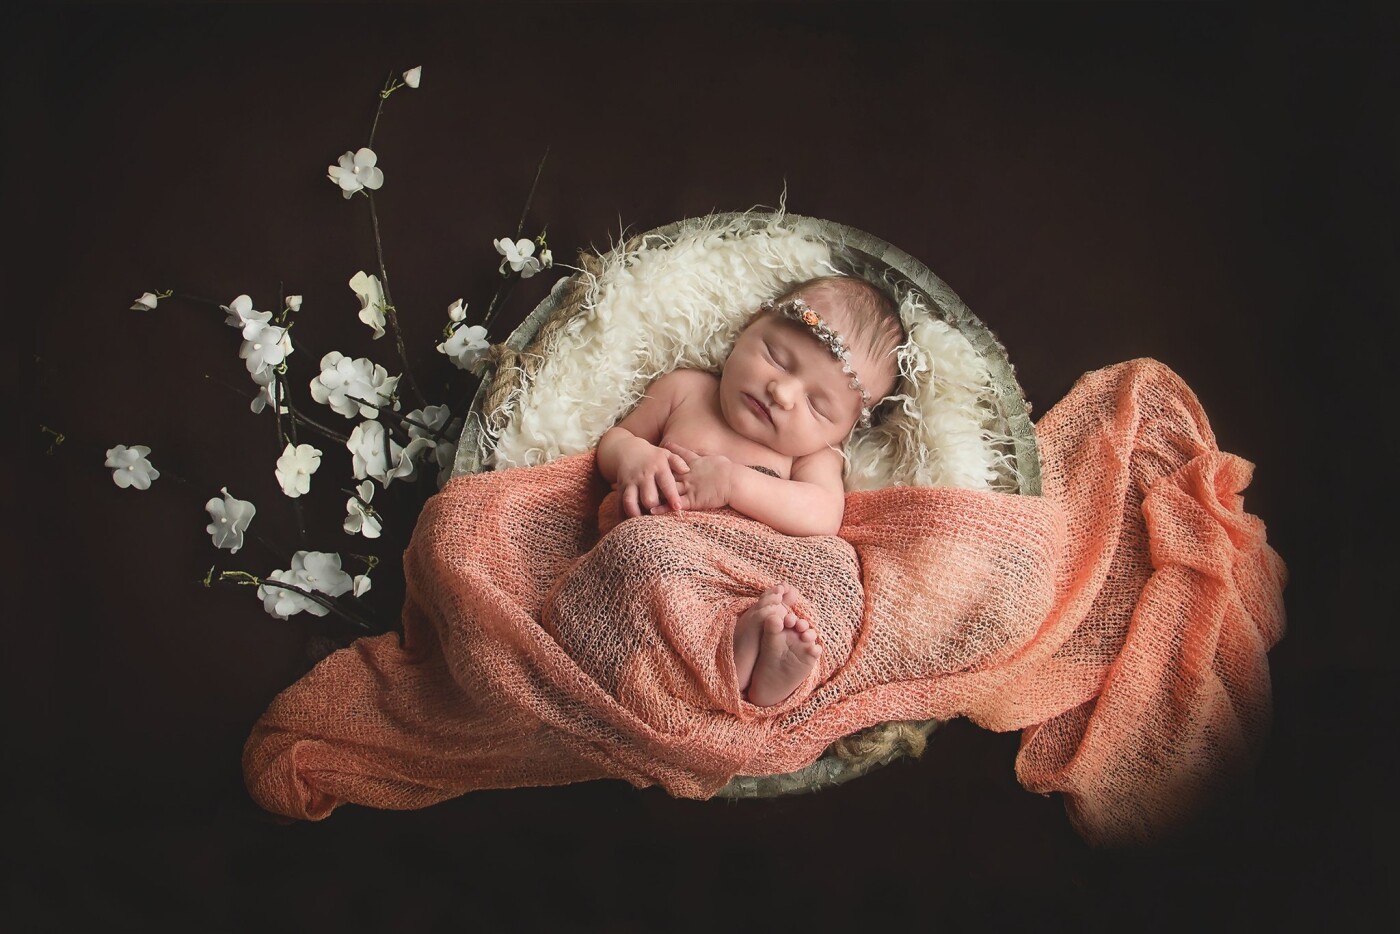 Noá - 6 days - she was sleeping the whole session, waiting for her 2 big brothers to come home.